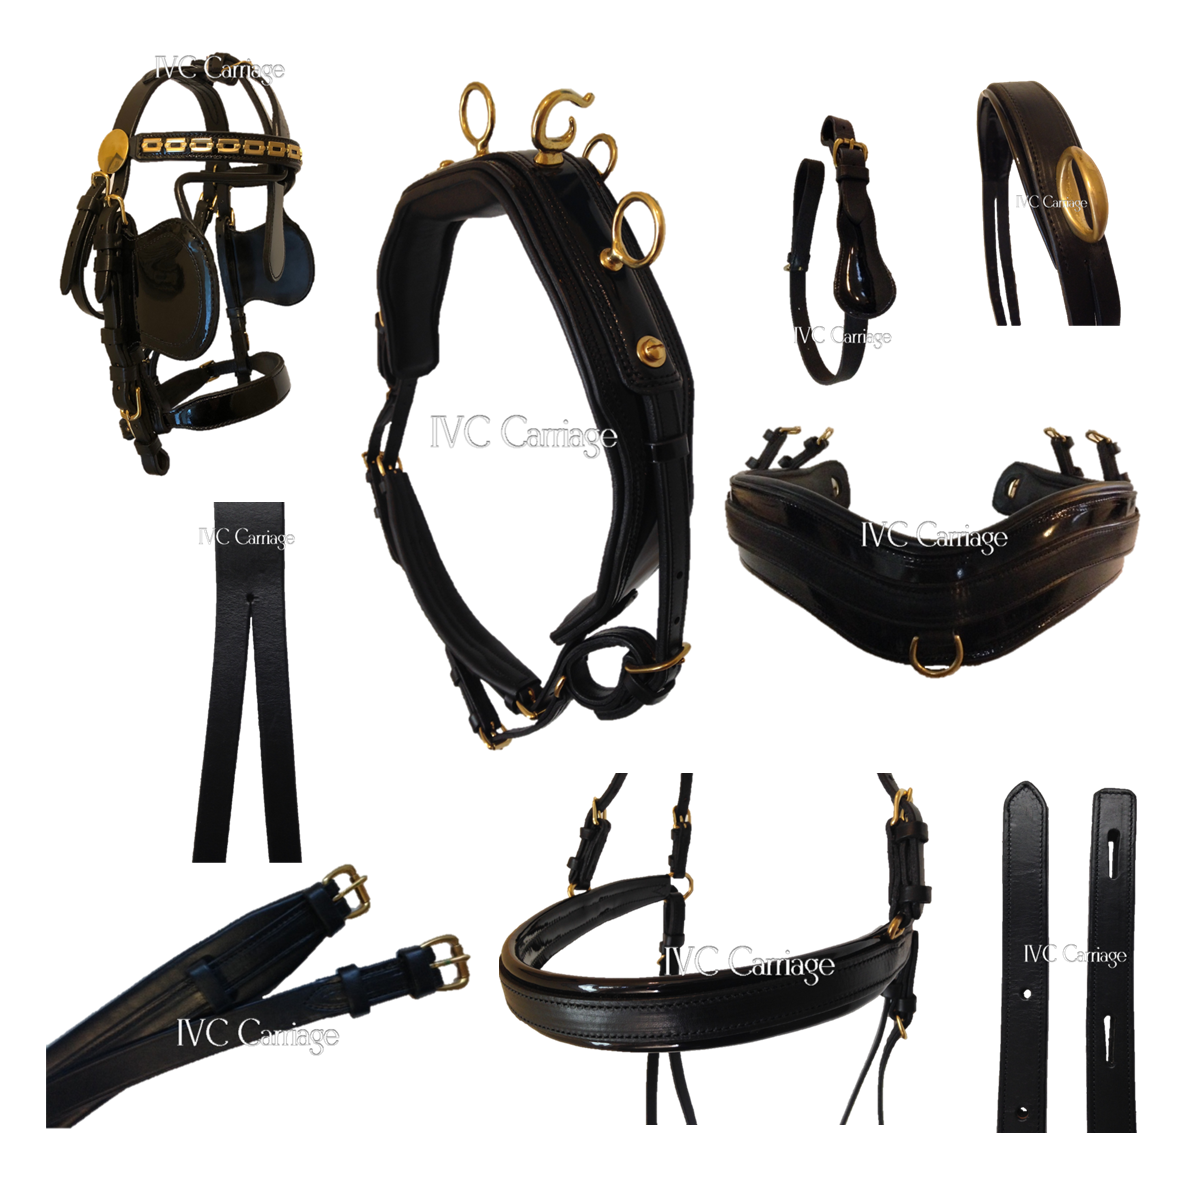 IVC Enhanced Leather Harness | IVC Carriage